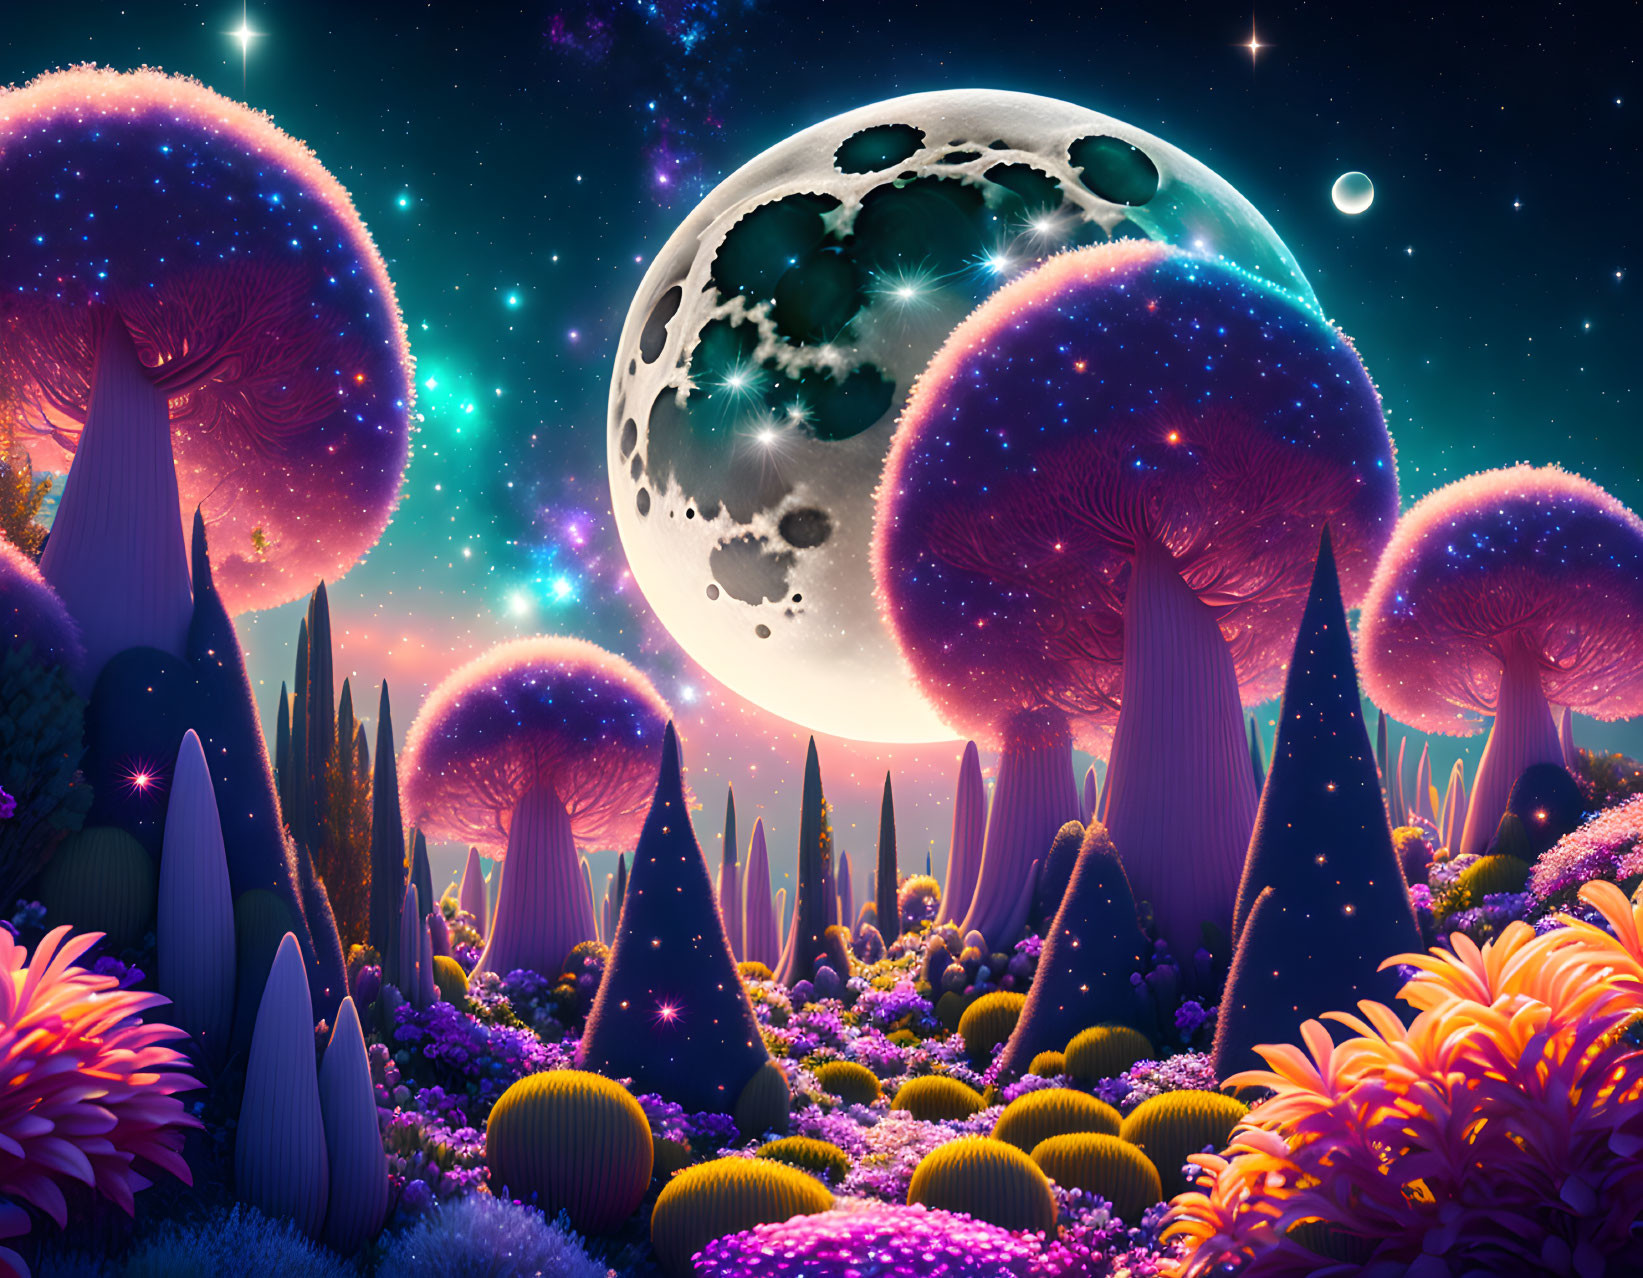 Fantasy night landscape with oversized mushrooms, plants, starry sky, and detailed moon